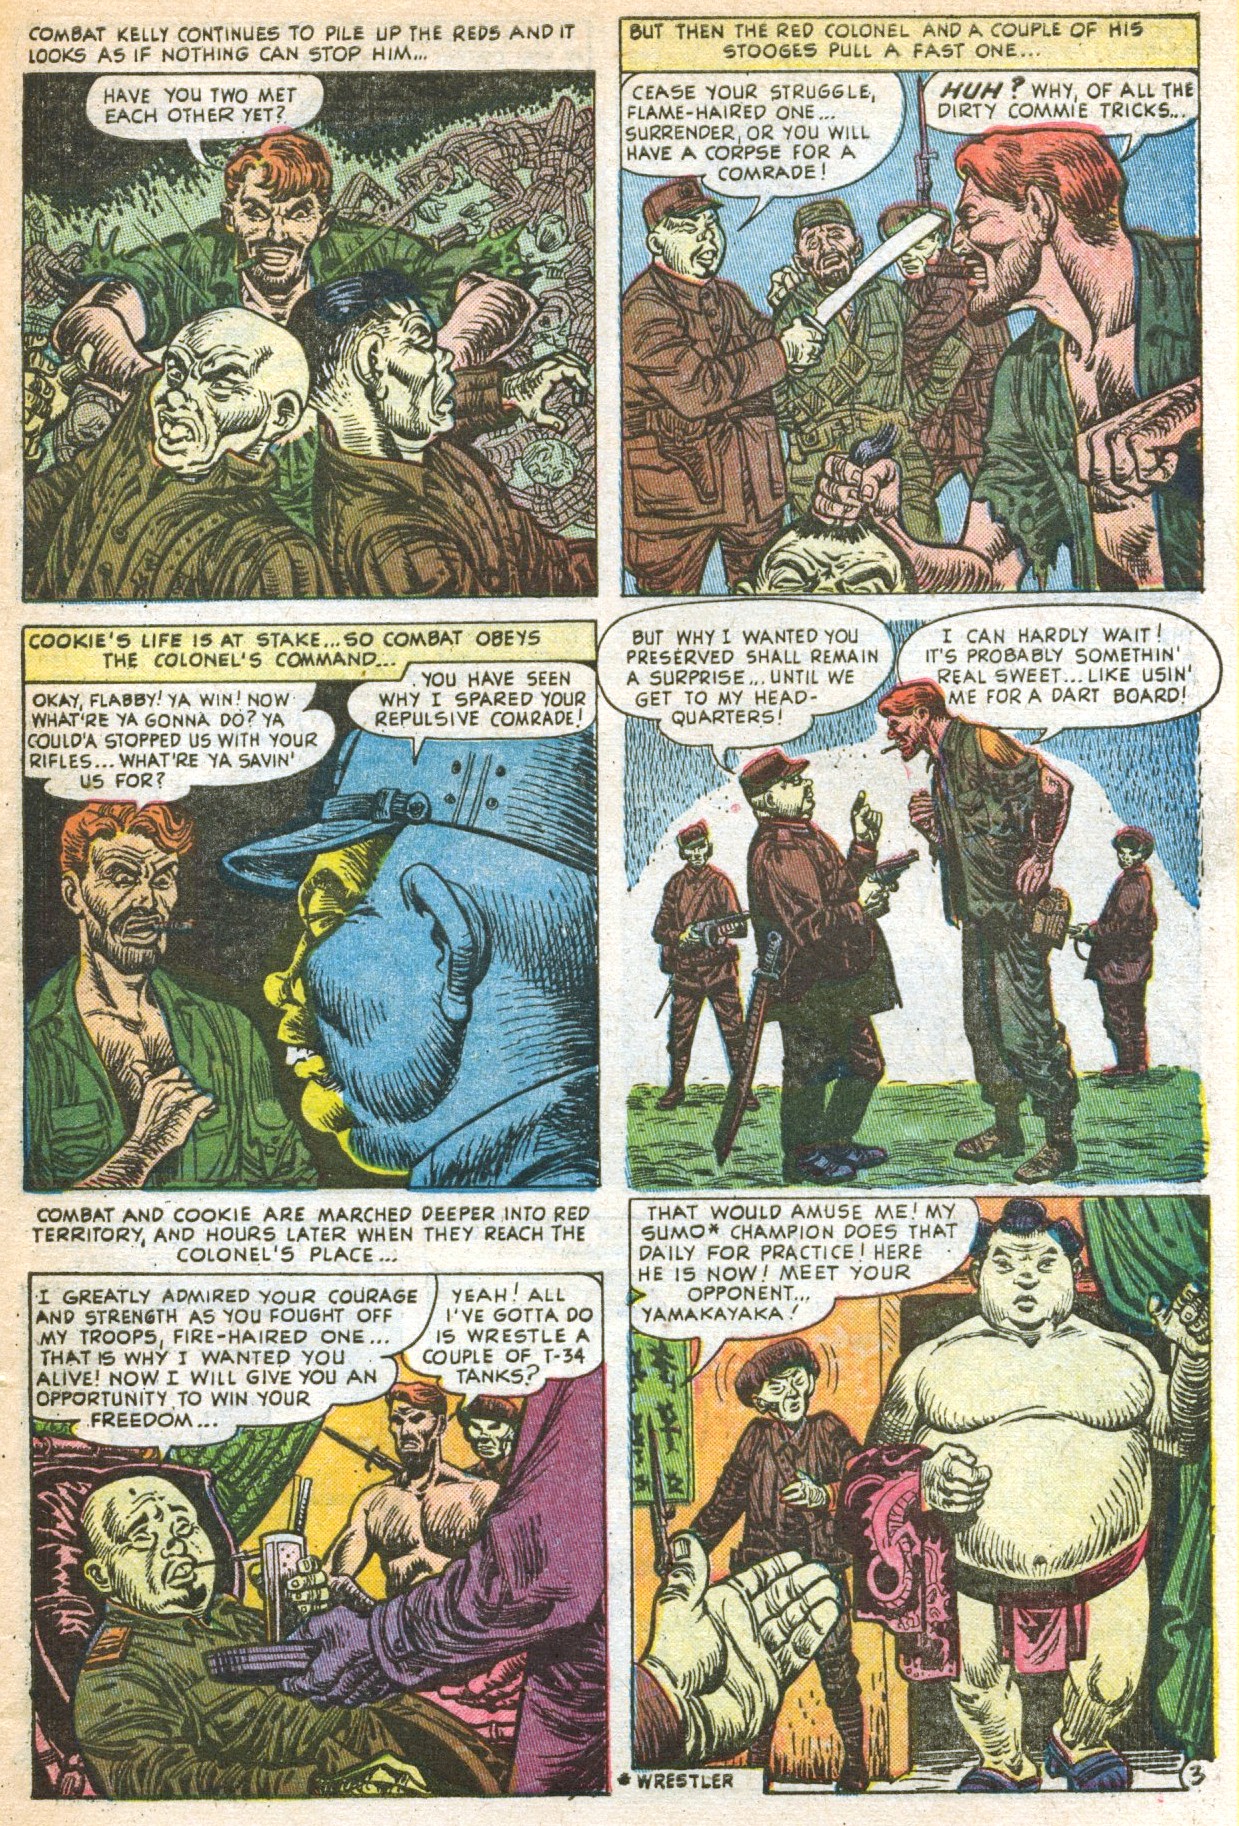 Read online Combat Kelly (1951) comic -  Issue #10 - 5